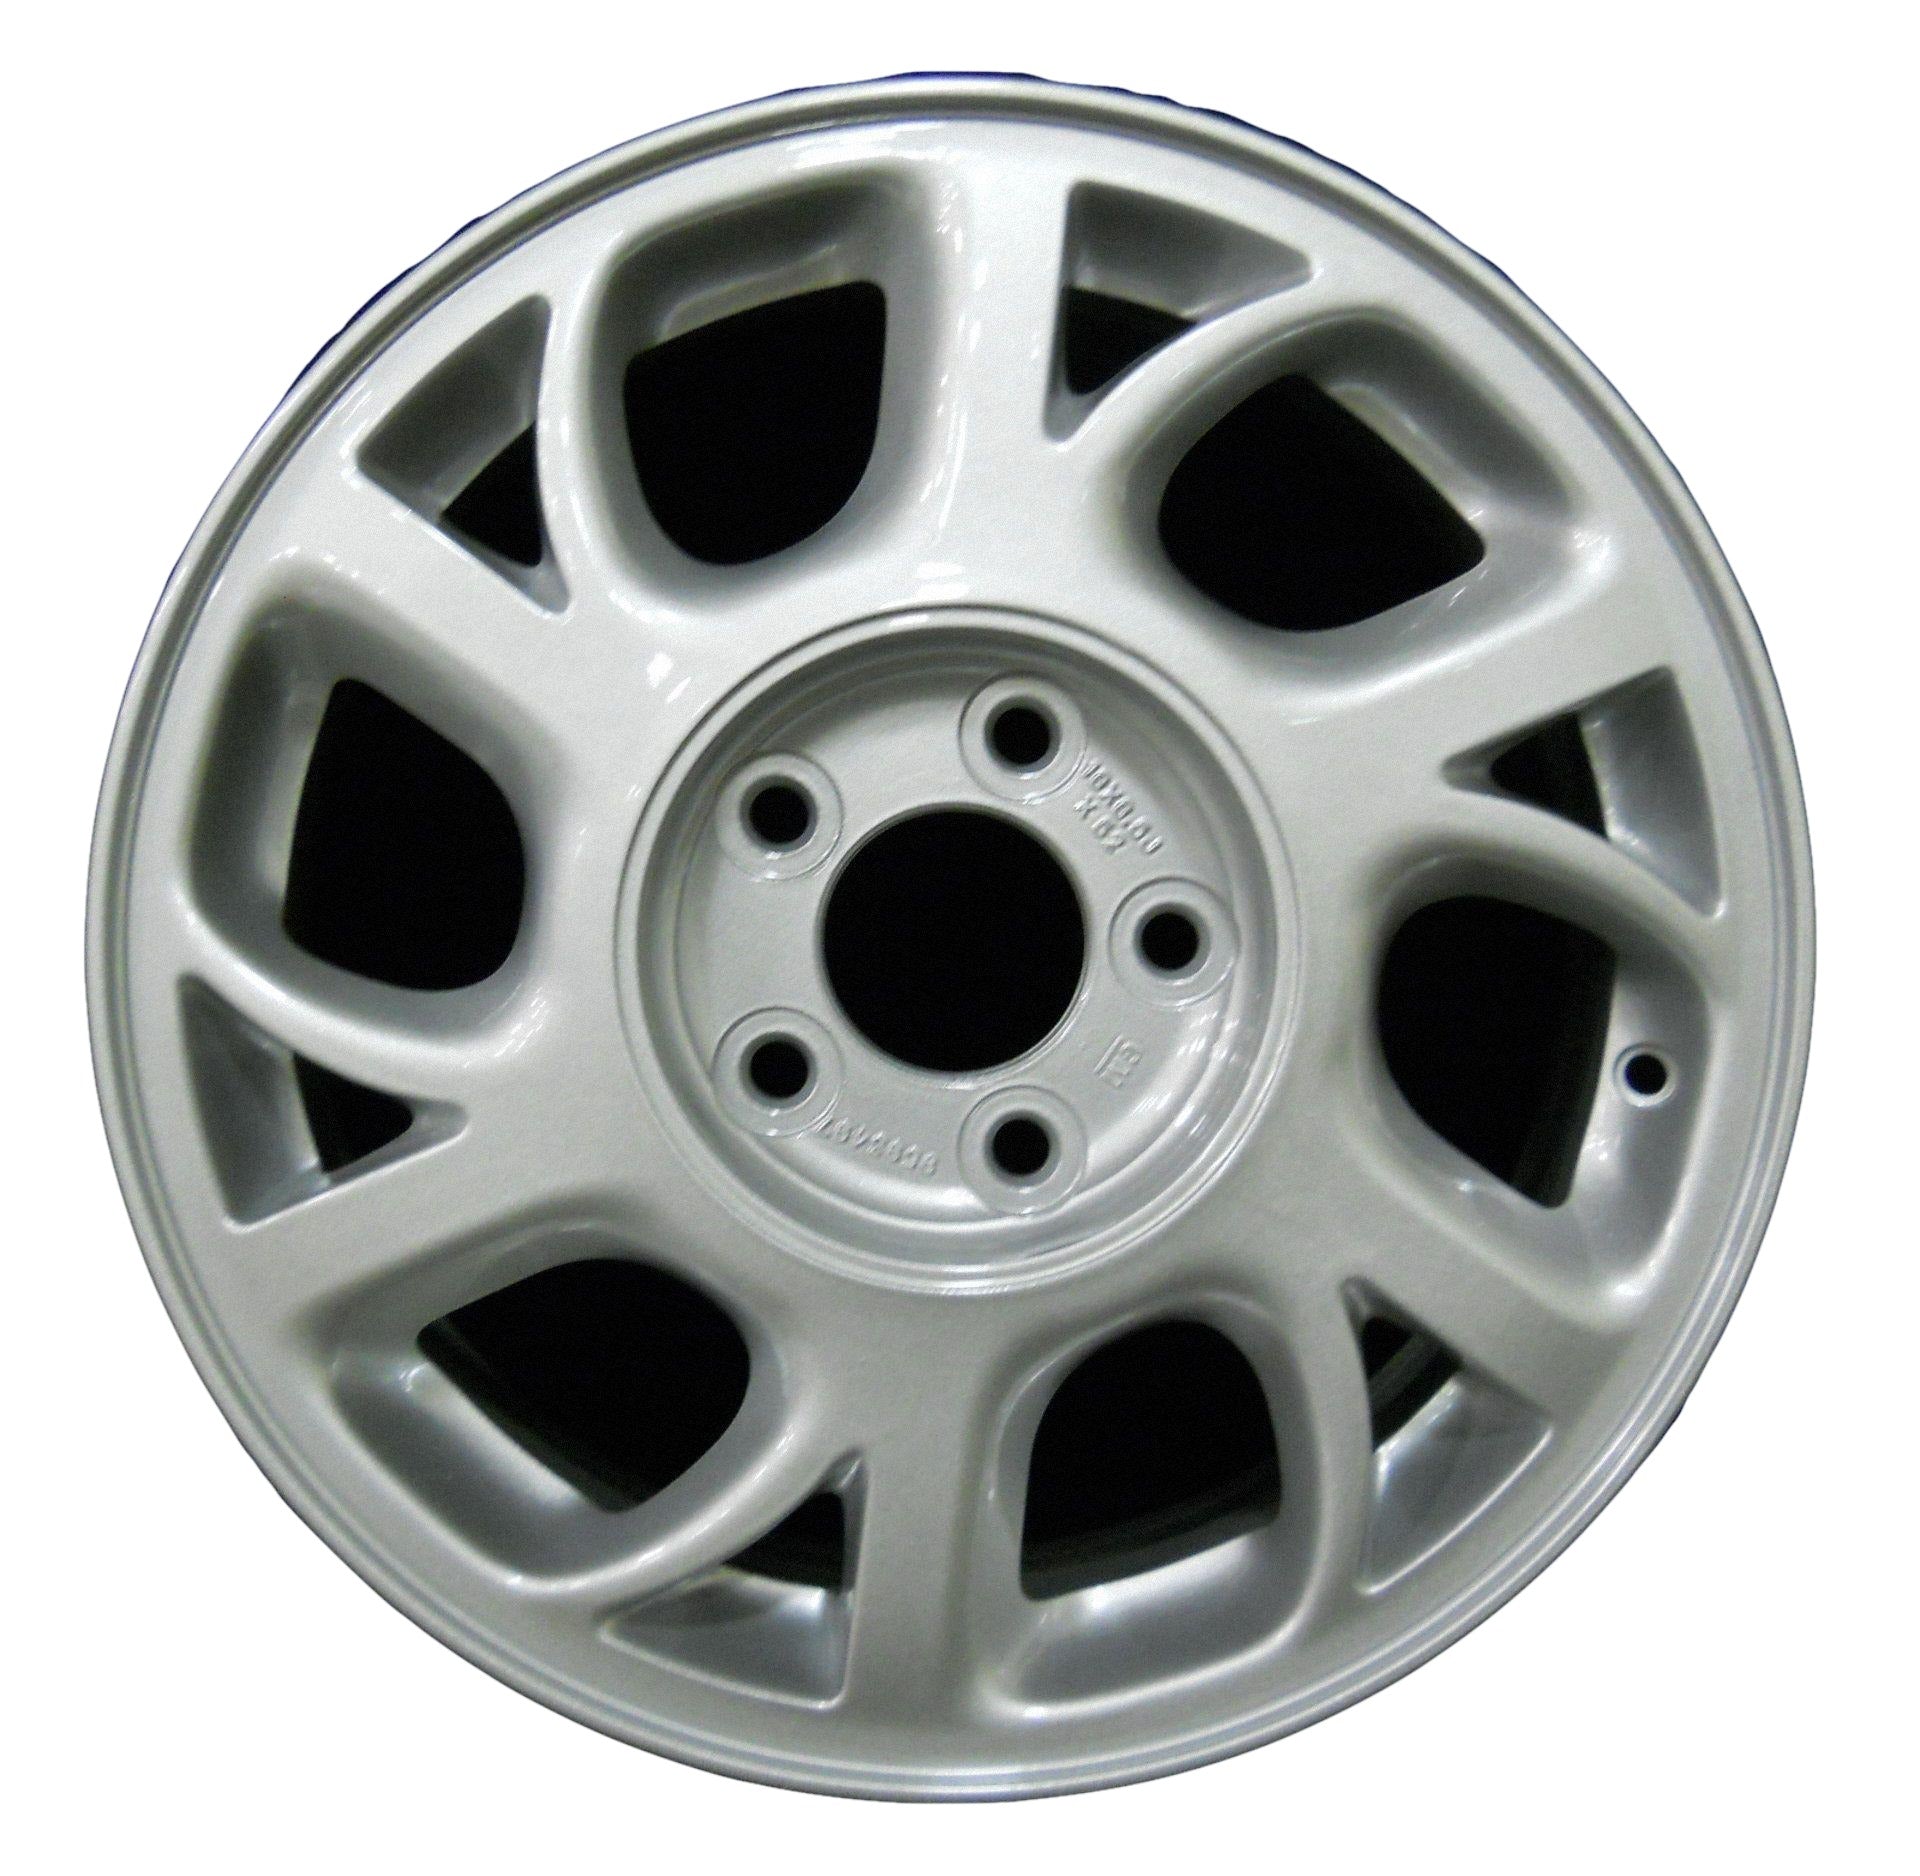 Oldsmobile Intrigue  2000, 2001, 2002 Factory OEM Car Wheel Size 16x6.5 Alloy WAO.6037.PS01.FF